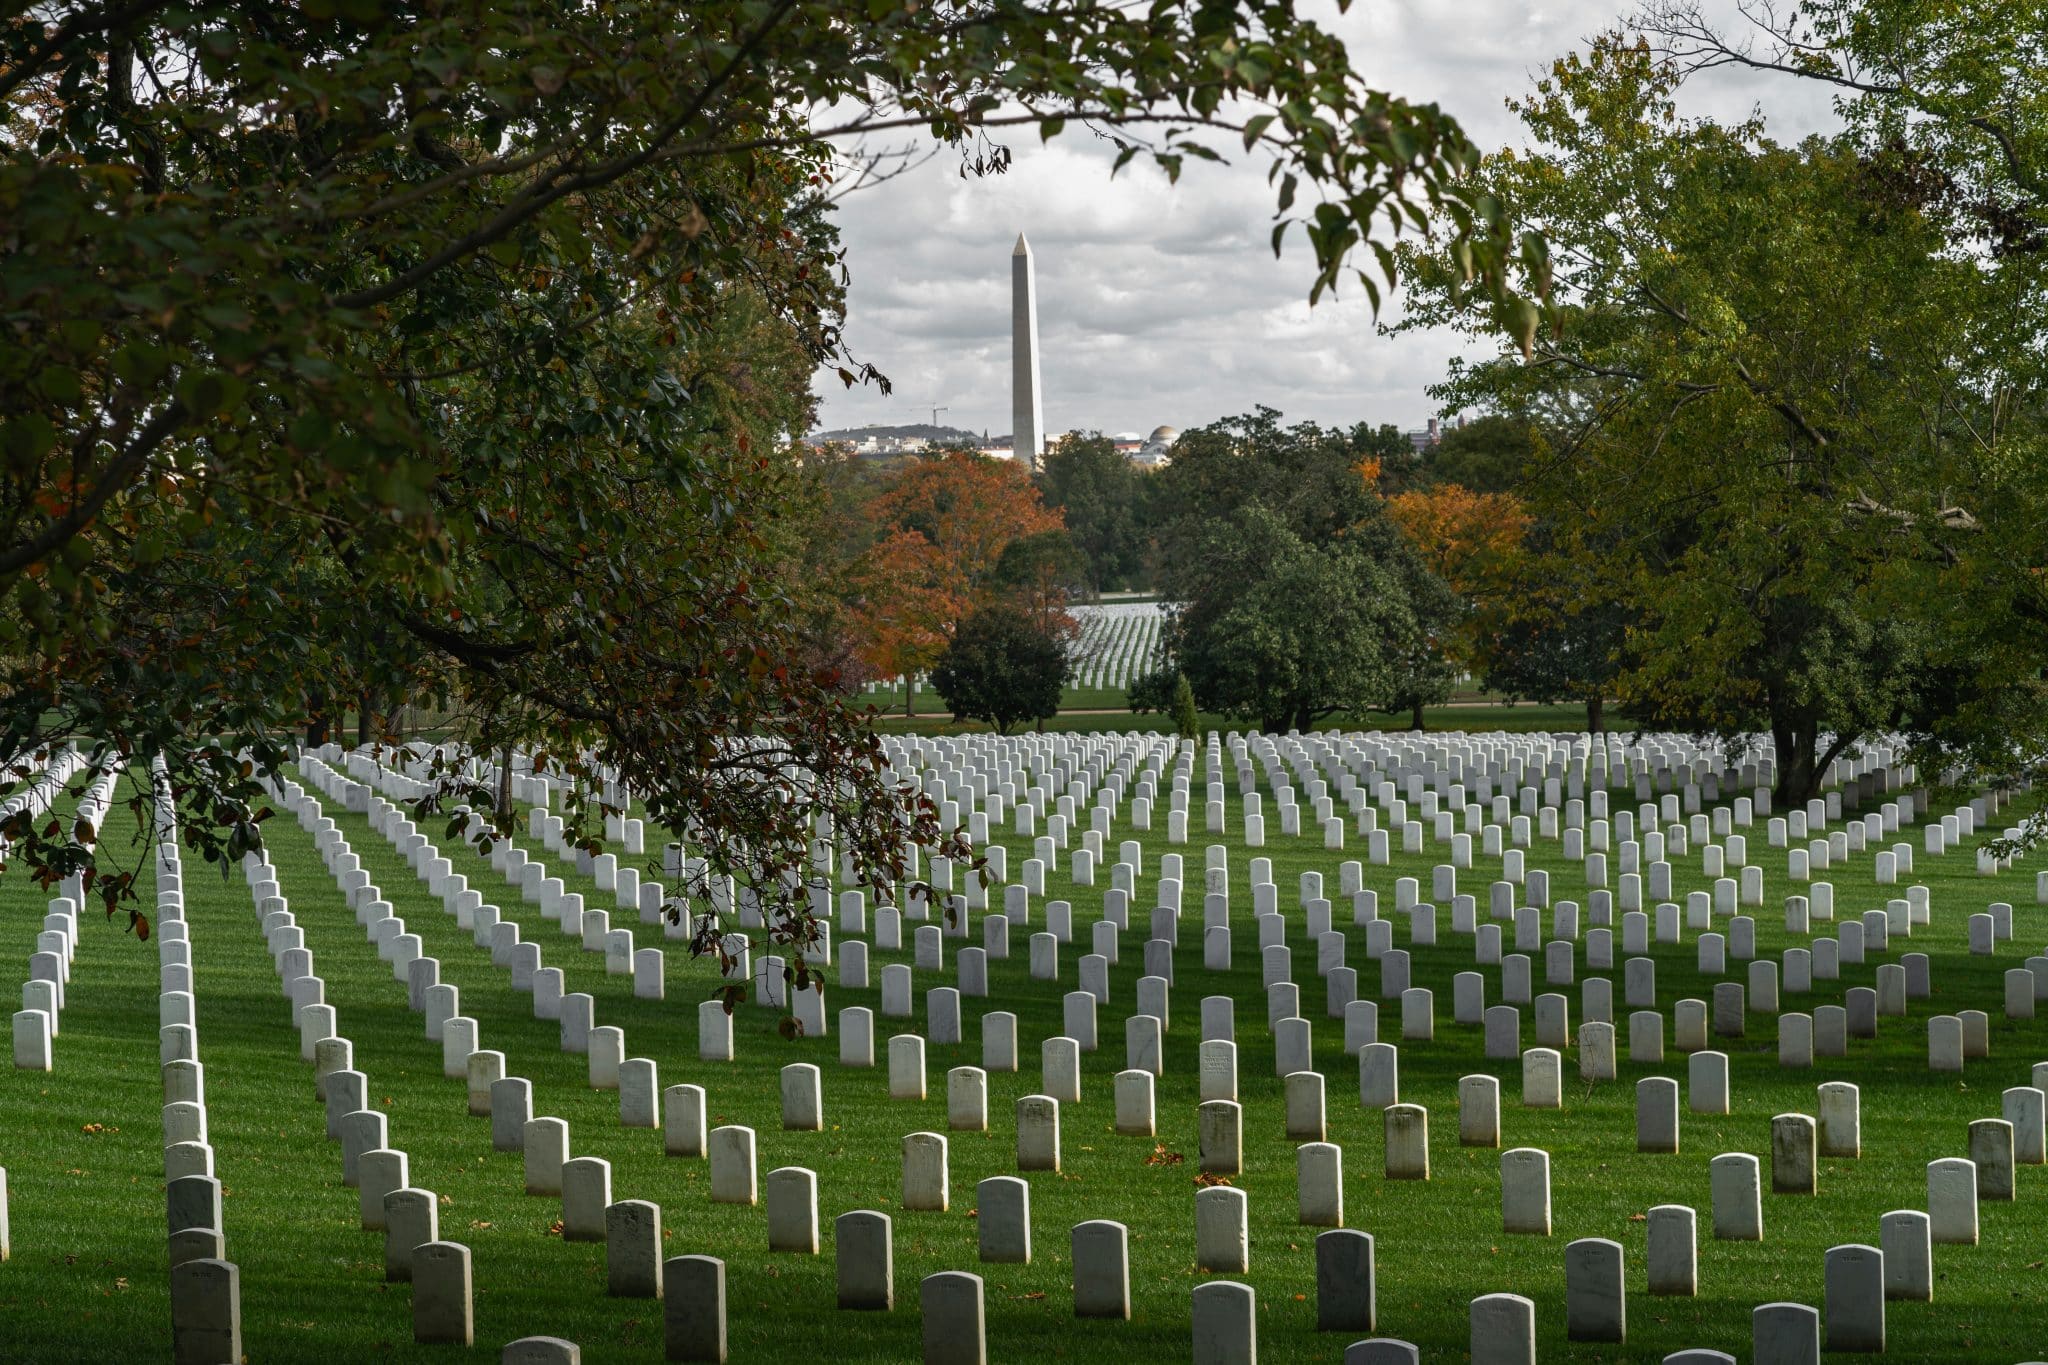 Trace Adkins sings about Arlington National Cemetery in his song "Arlington"